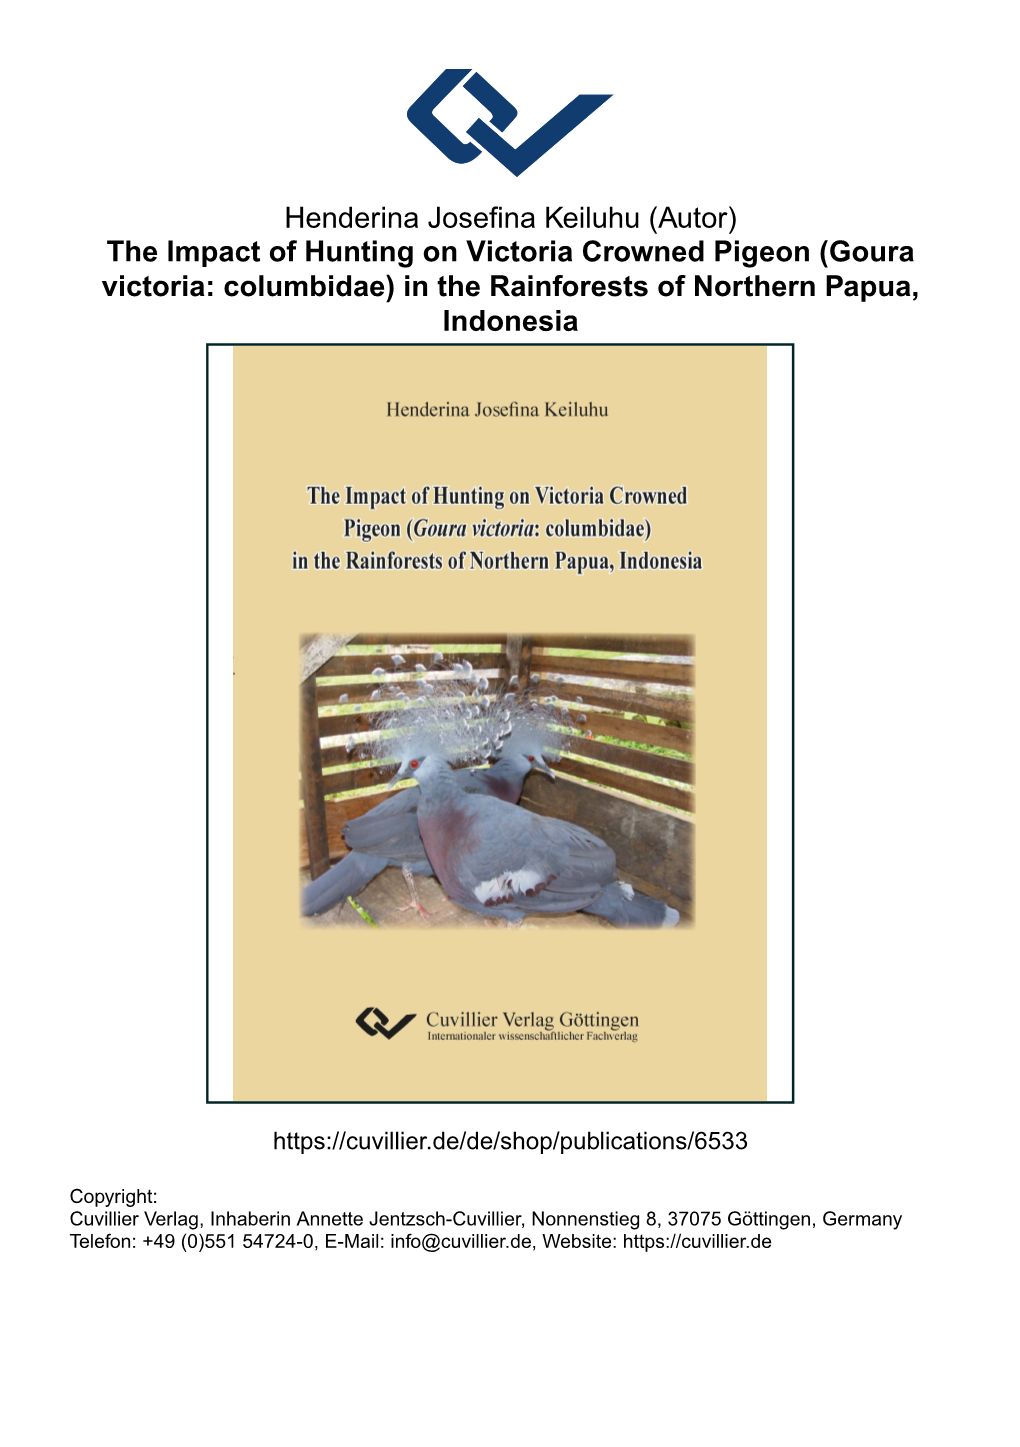 (Autor) the Impact of Hunting on Victoria Crowned Pigeon (Goura Victoria: Columbidae) in the Rainforests of Northern Papua, Indonesia